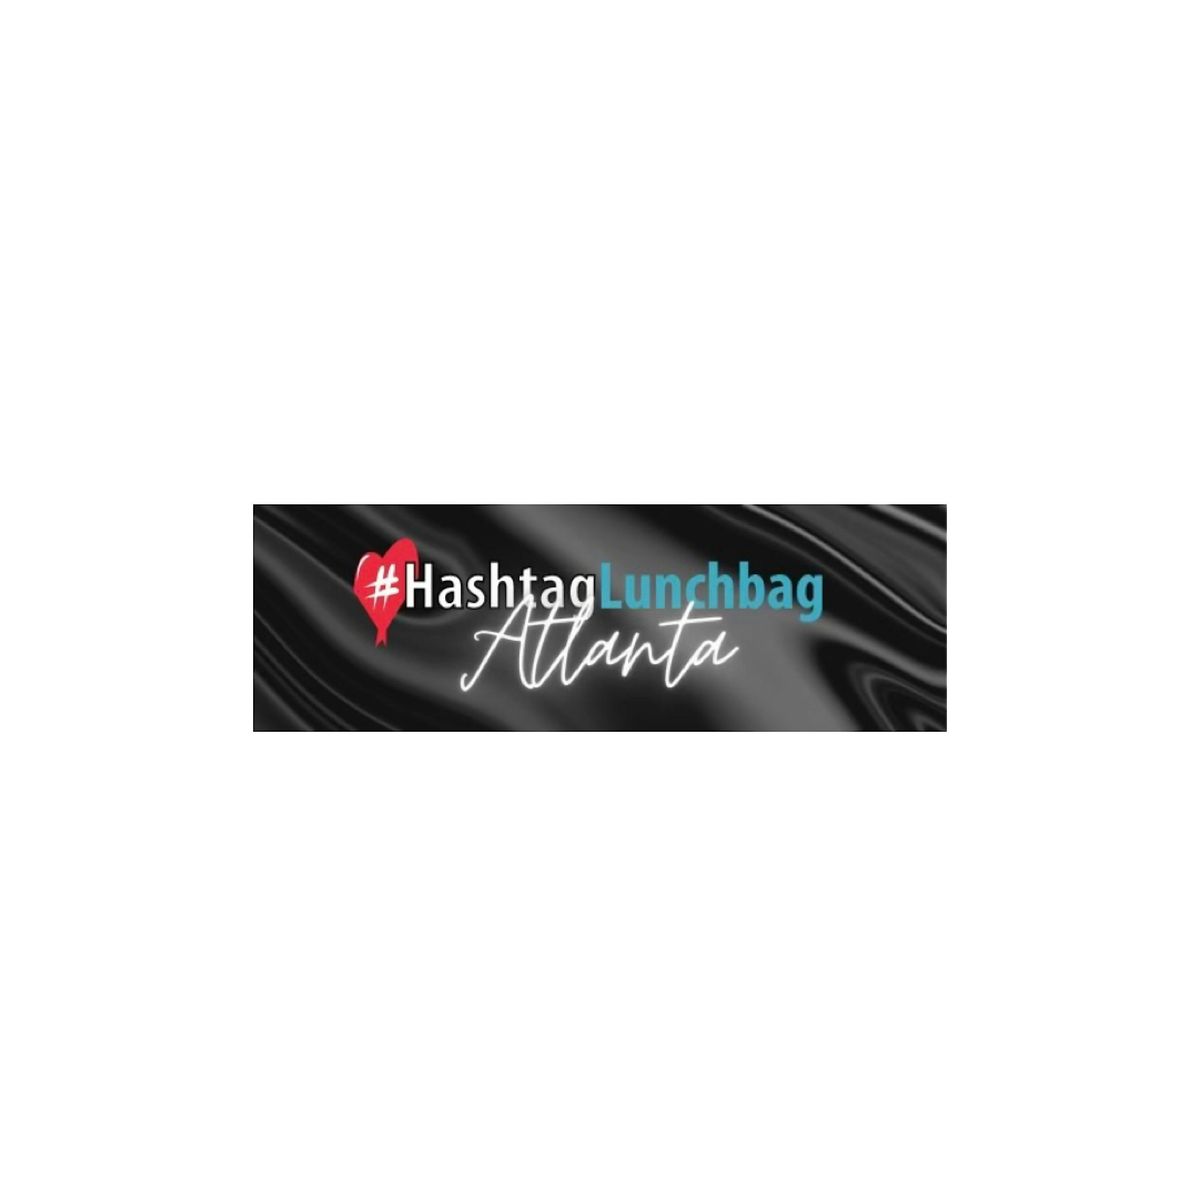 Hashtag Lunchbag ATL x Usher\u2019s New Look: June  Service Event